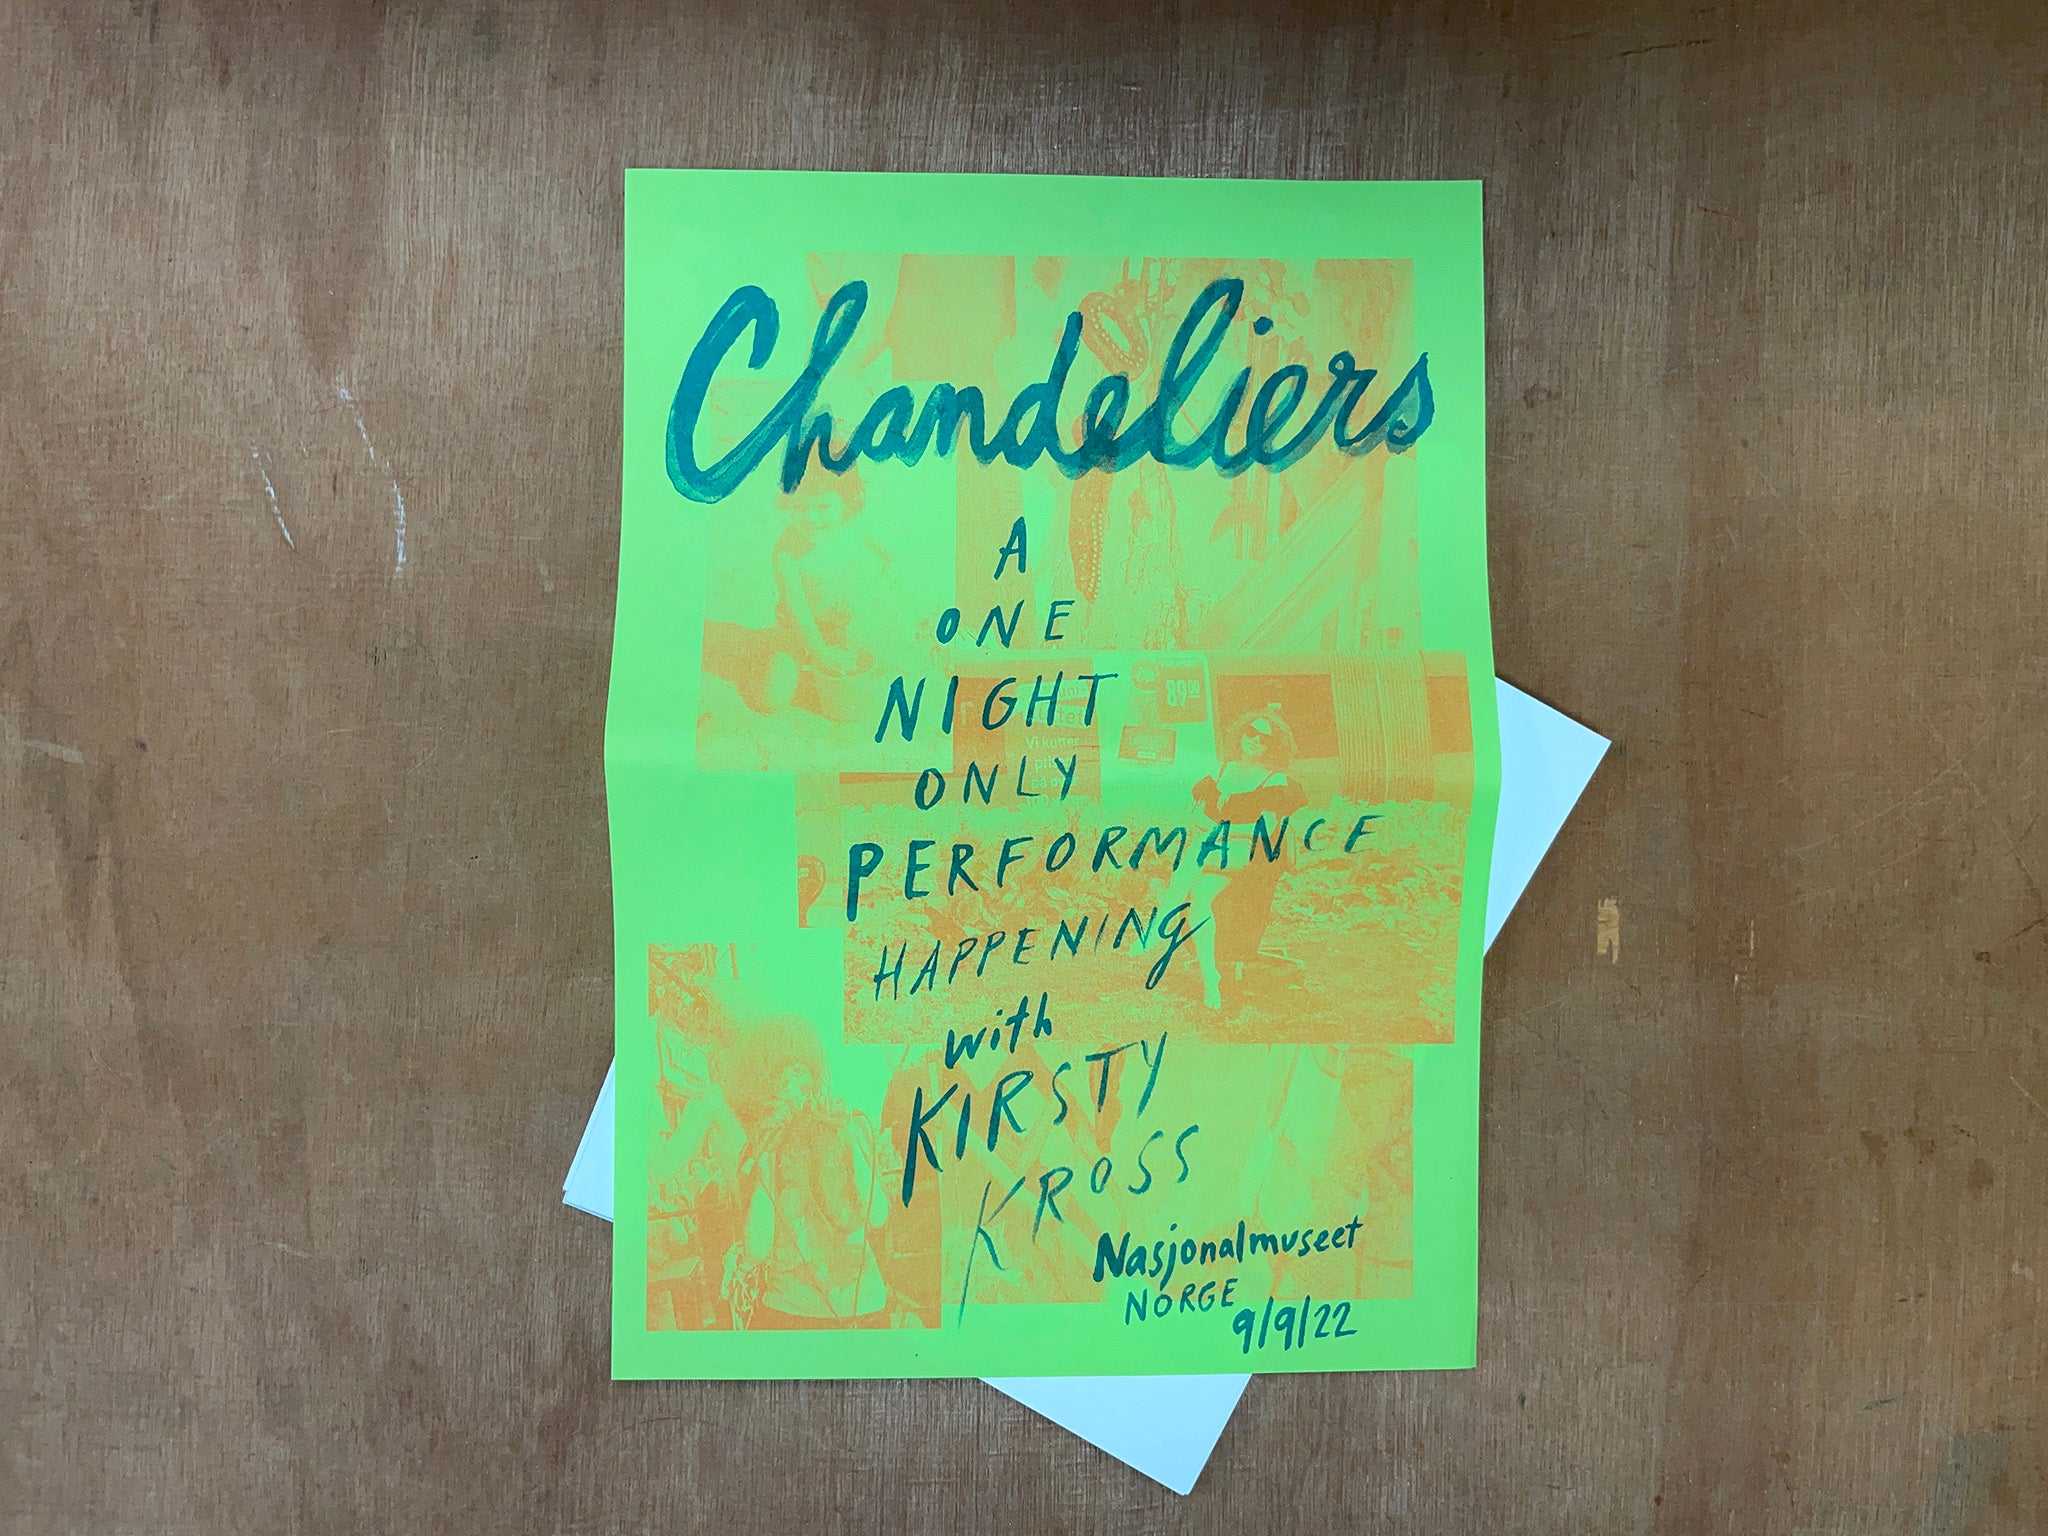 CHANDELIERS - A ONE NIGHT ONLY PERFORMANCE HAPPENING WITH KIRSTY KROSS by Kristy Kross